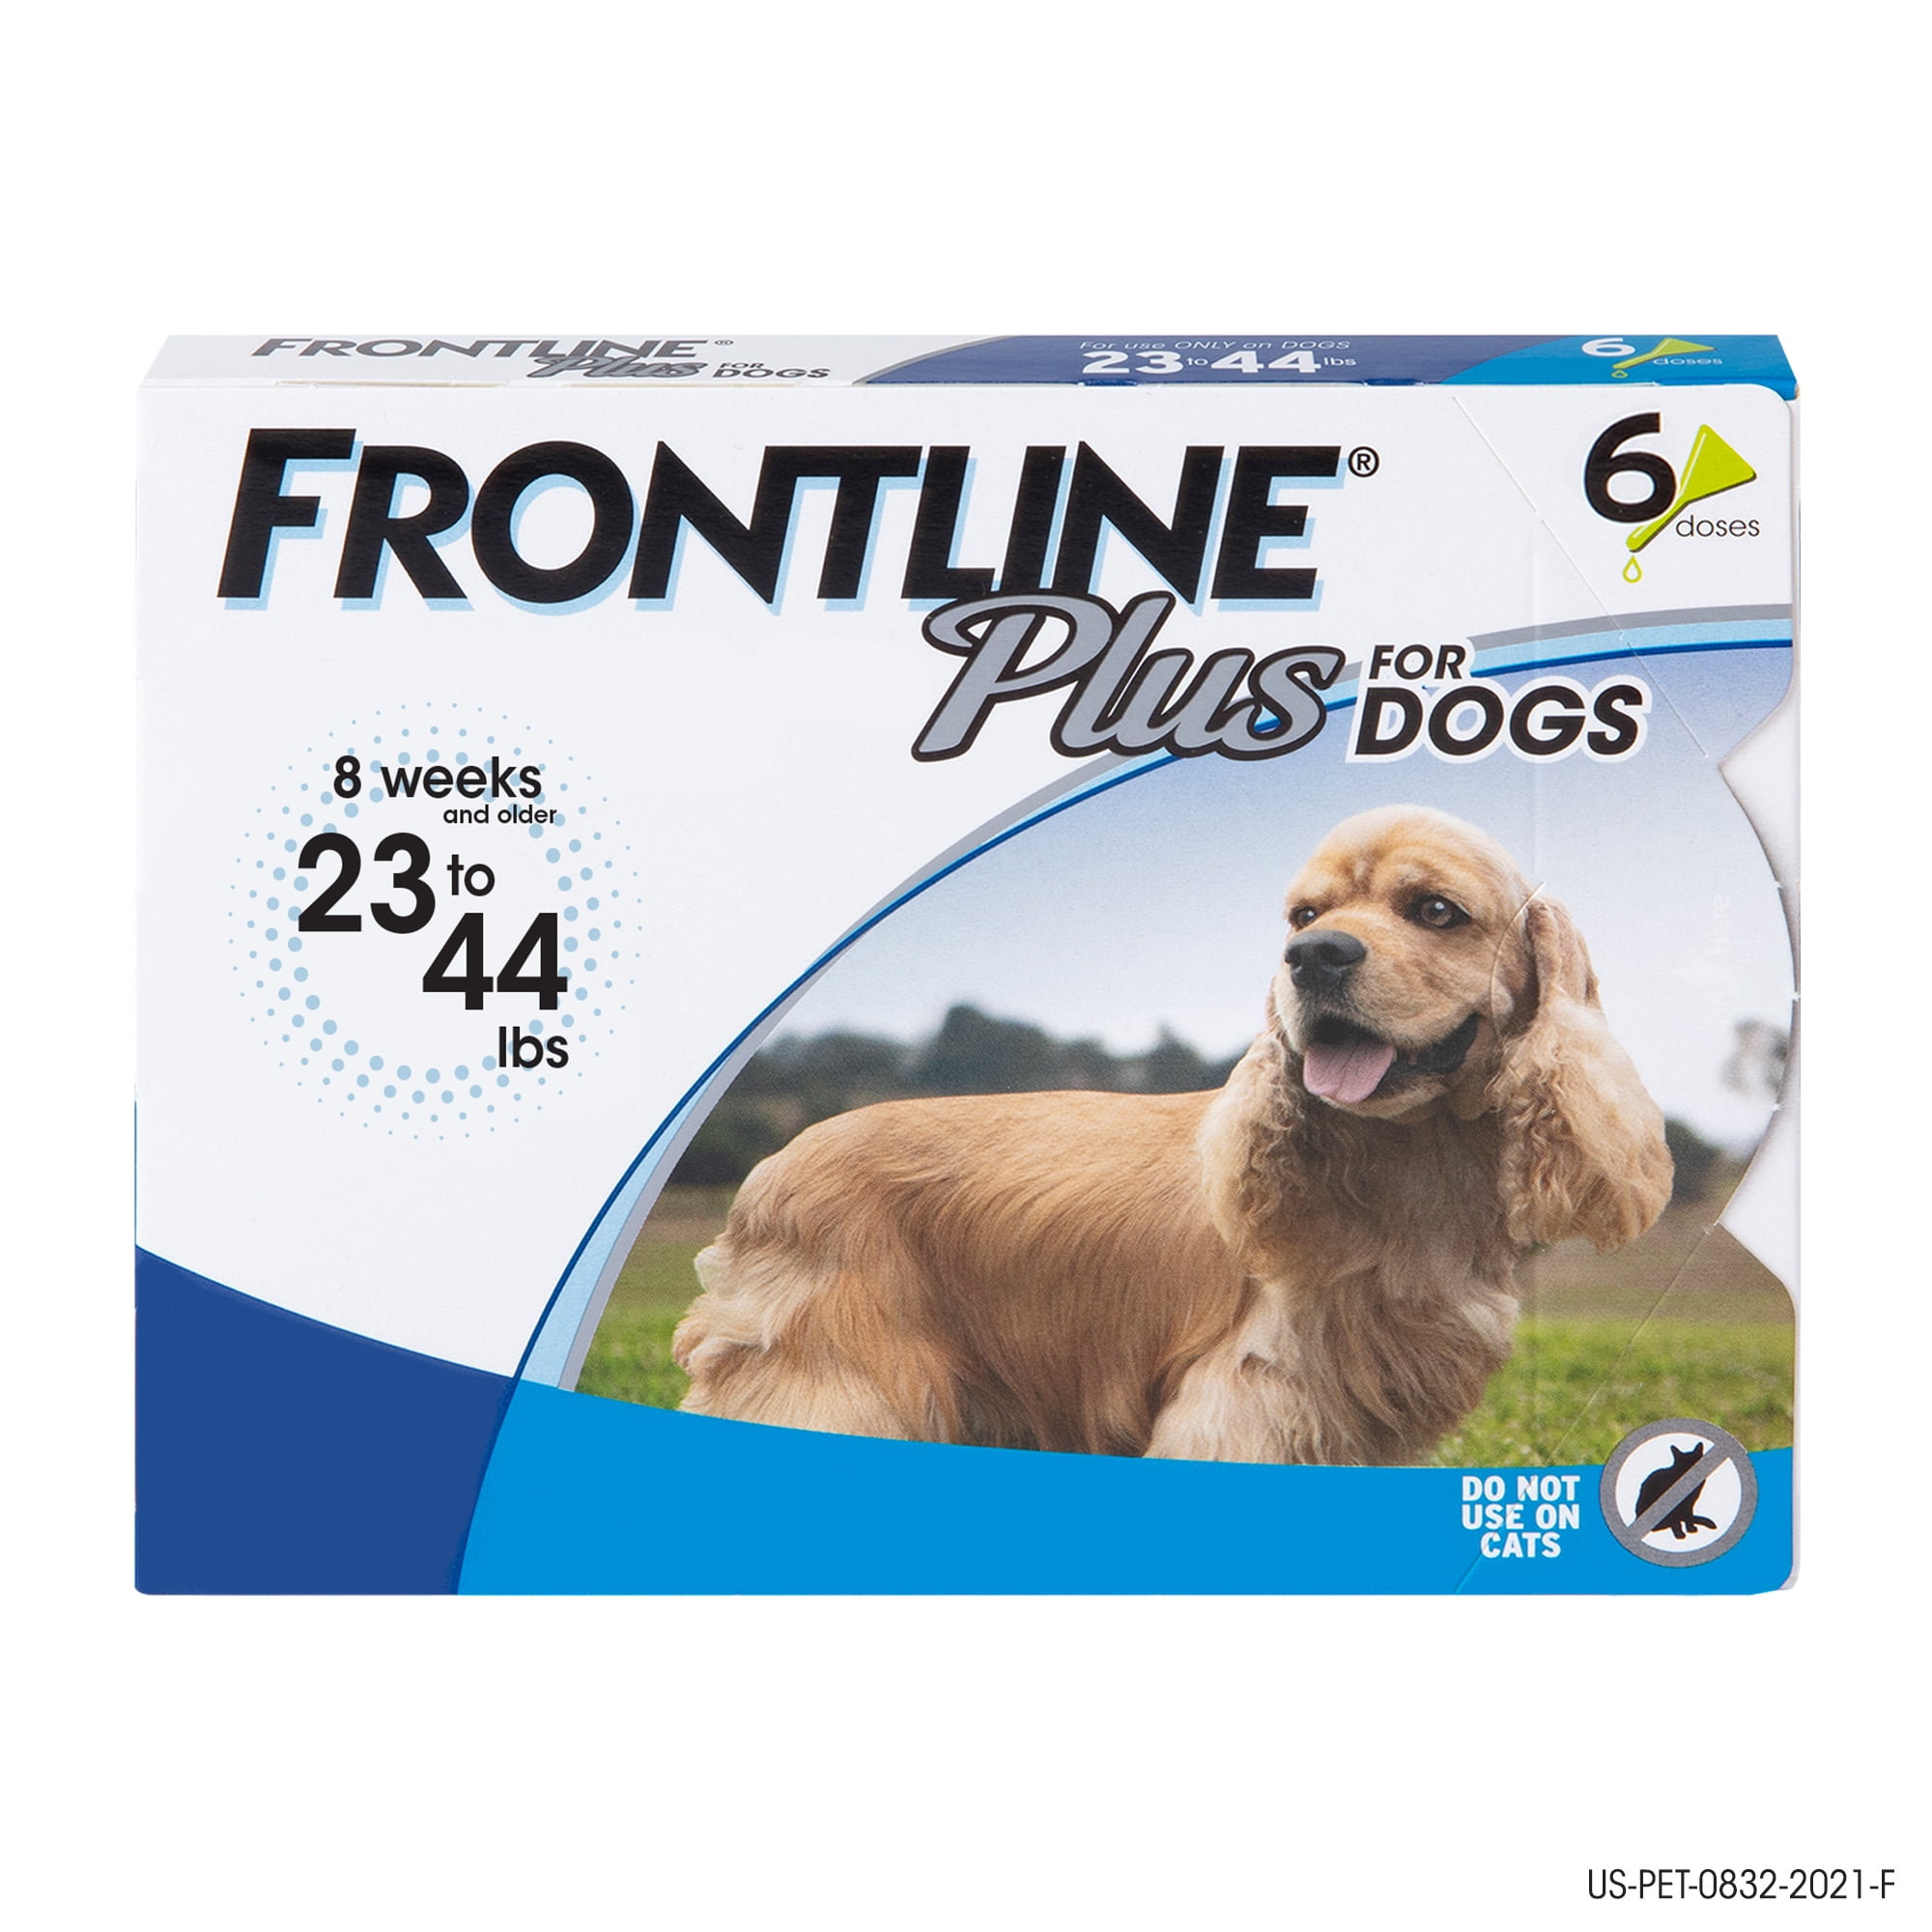 PRO-FRONT ADVANCED FLEA CONTROL-up to 100 TREATMENTS for 6 to 16 pound pets 